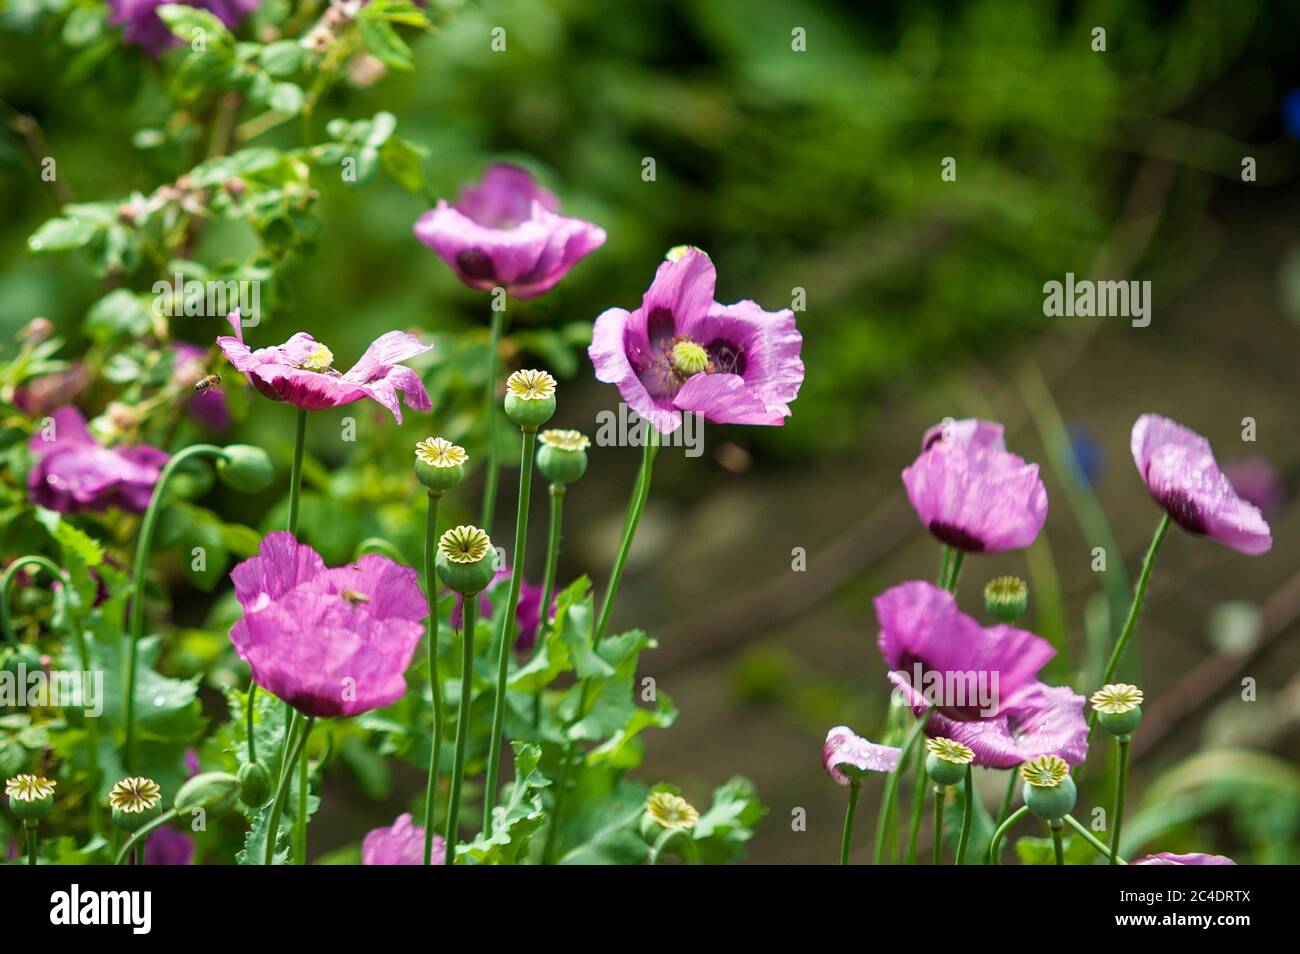 Bees in Poppy Blossoms Stock Photo